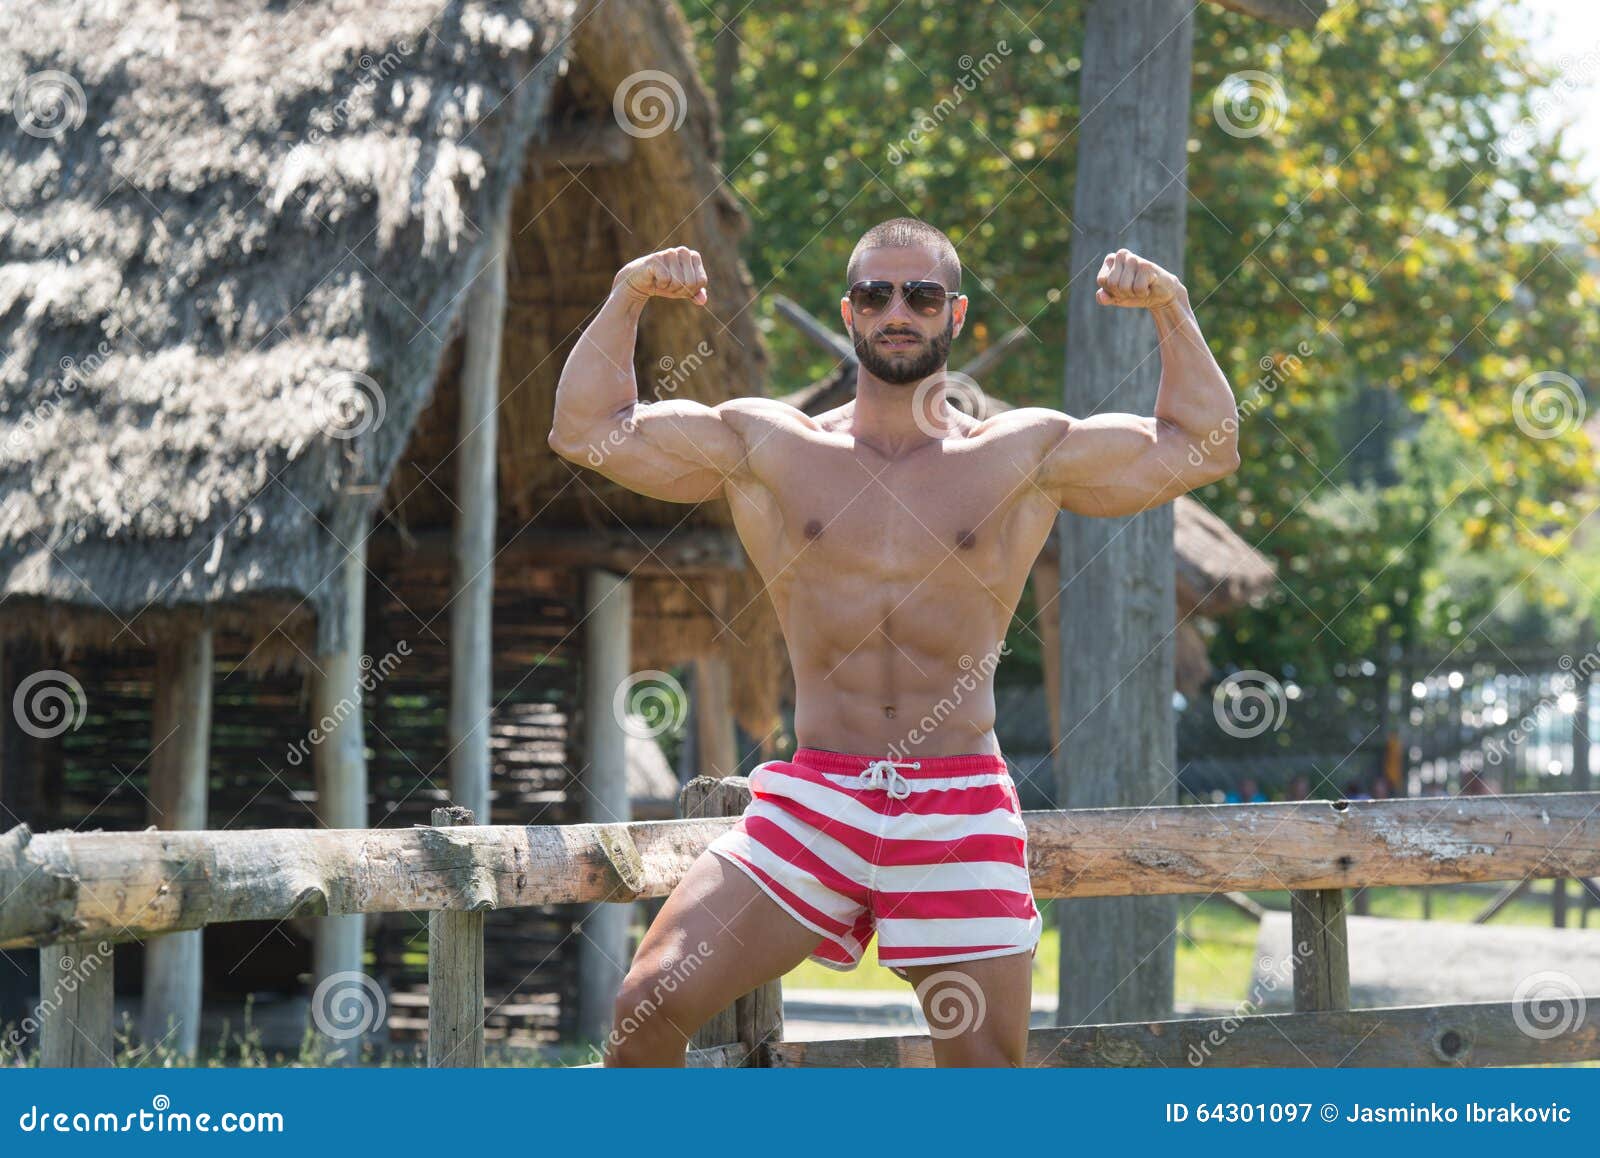 Double Biceps Pose Outdoors In Summer Stock Image Image Of Exercising Bodybuilding 64301097 